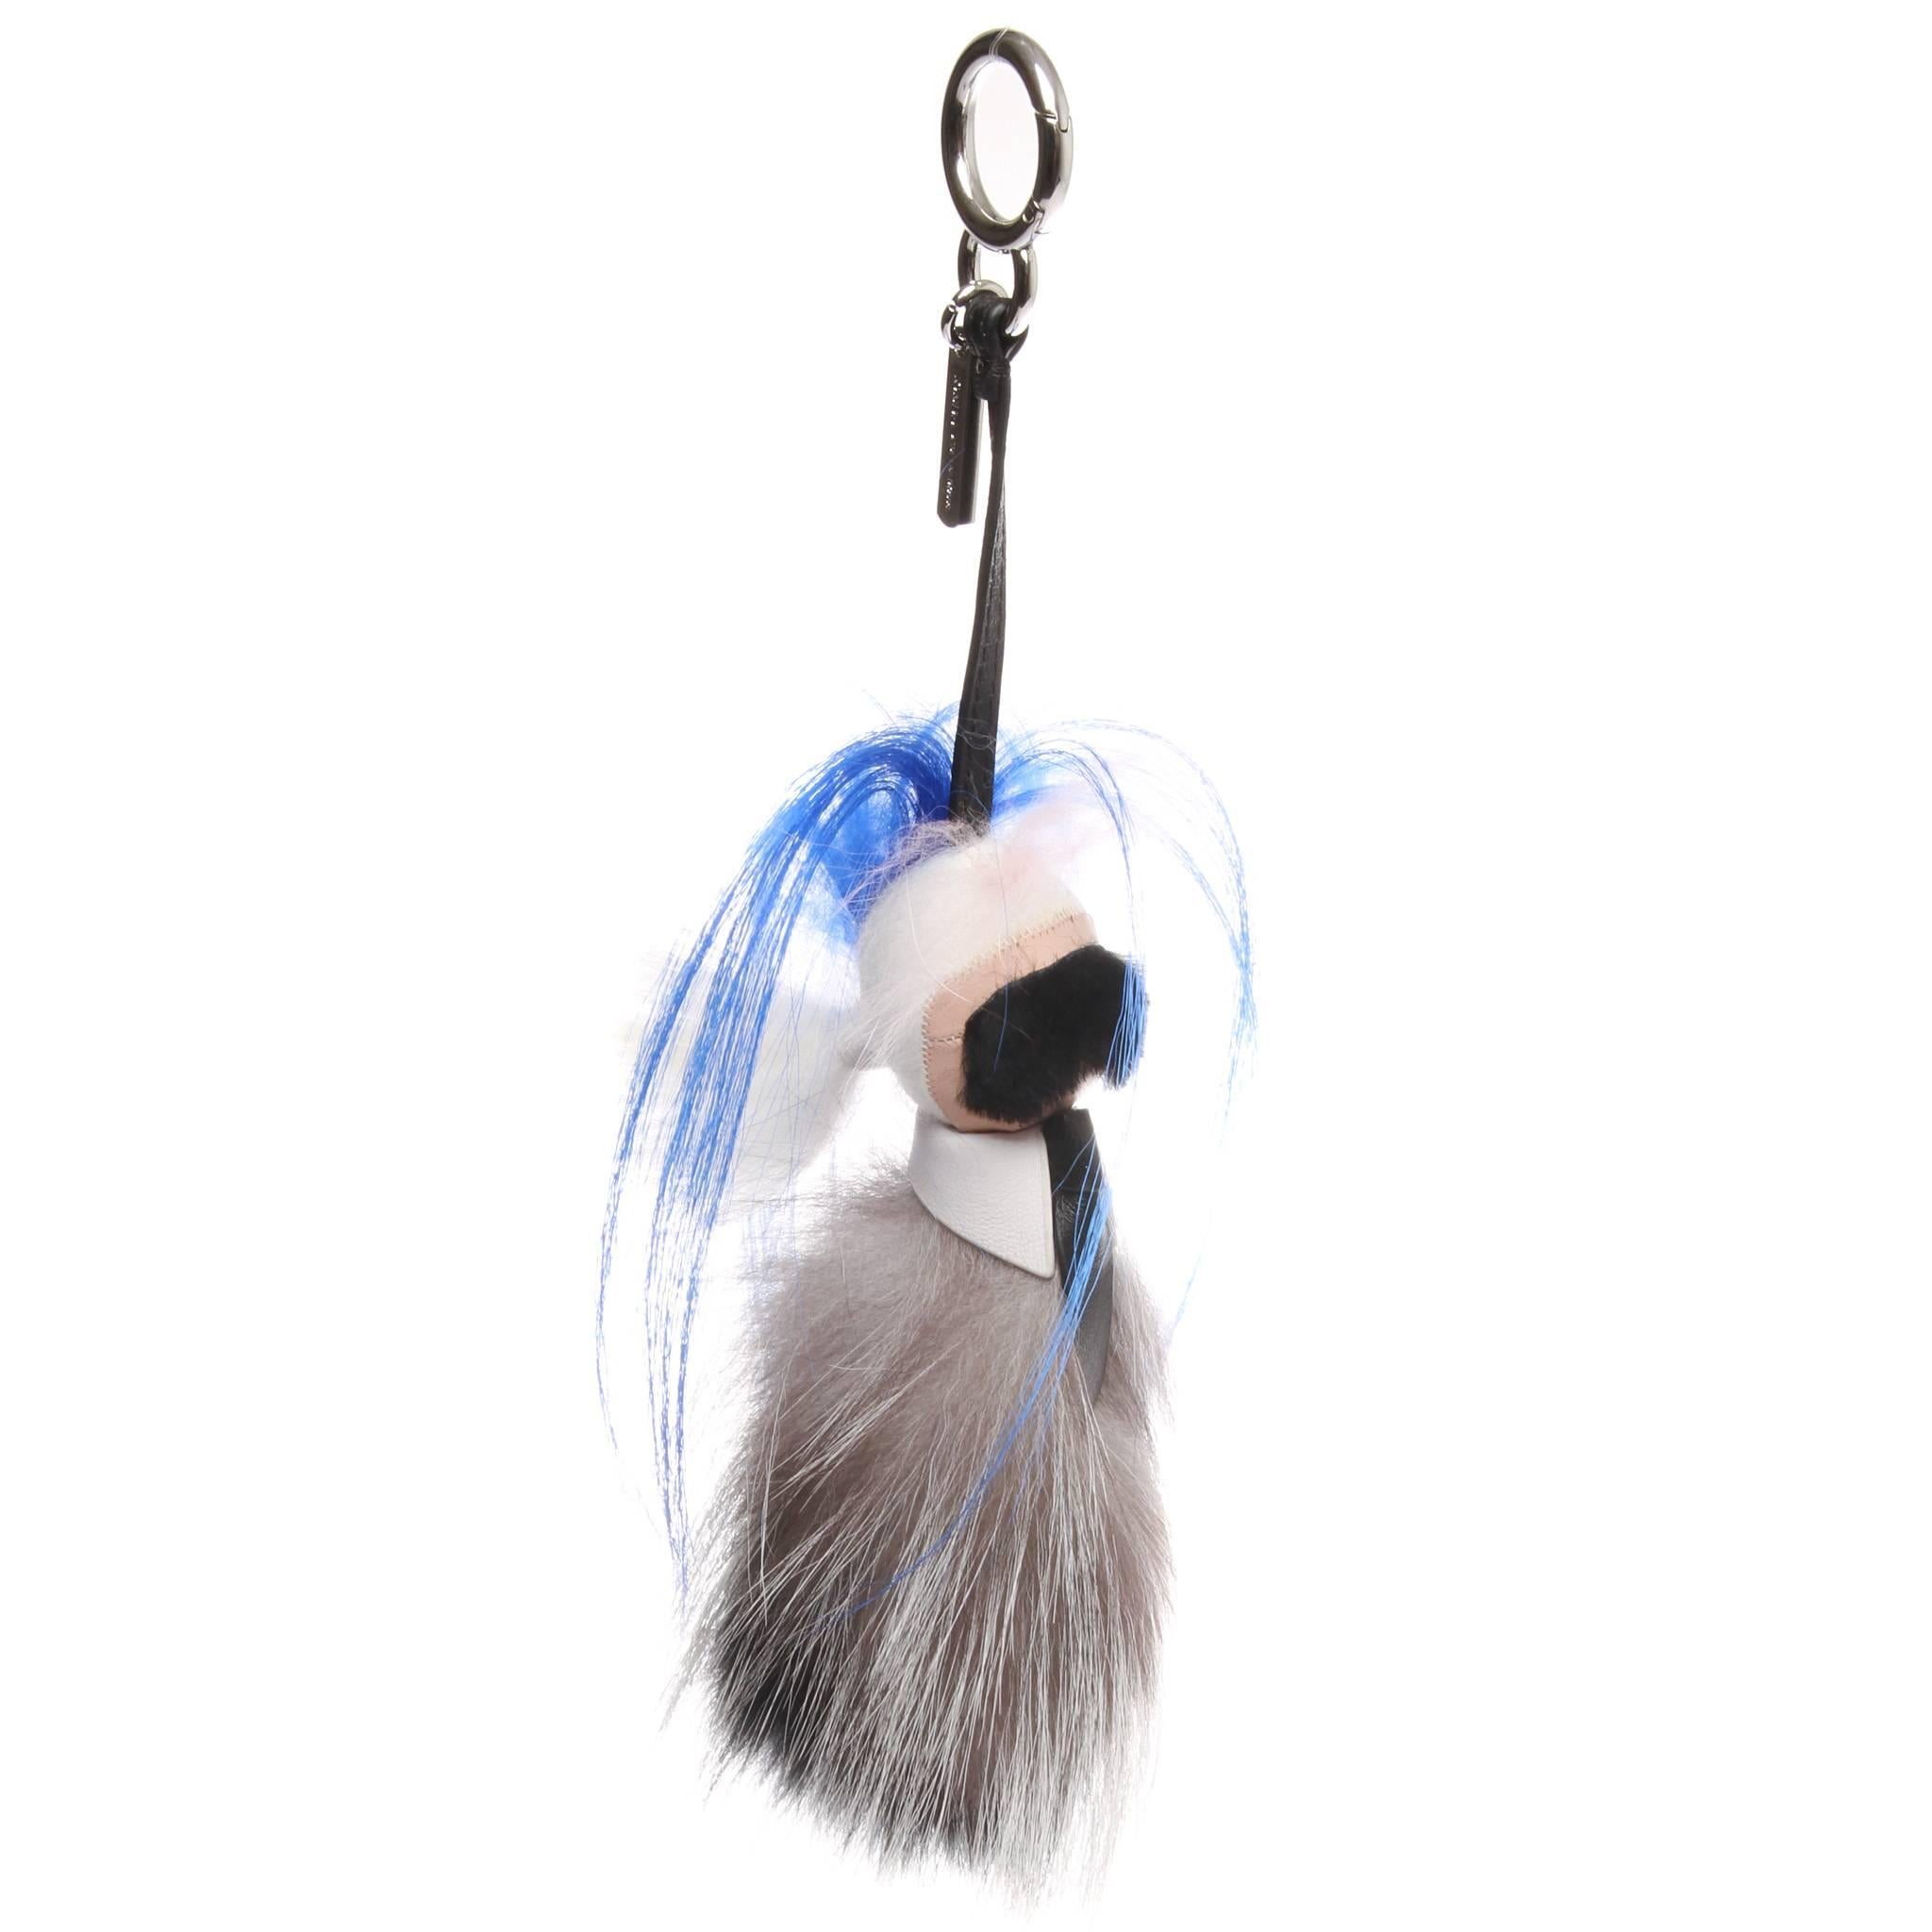 Authentic Fendi 'Mini Karlito' Bag Charm in mink and kidassia fur, with a pink tuft and a blue edge. Details and black calfskin leather laces. Palladium-finish spring clip and tag. Limited edition. Total length: 30cm, length of charm: 19cm.

Made in